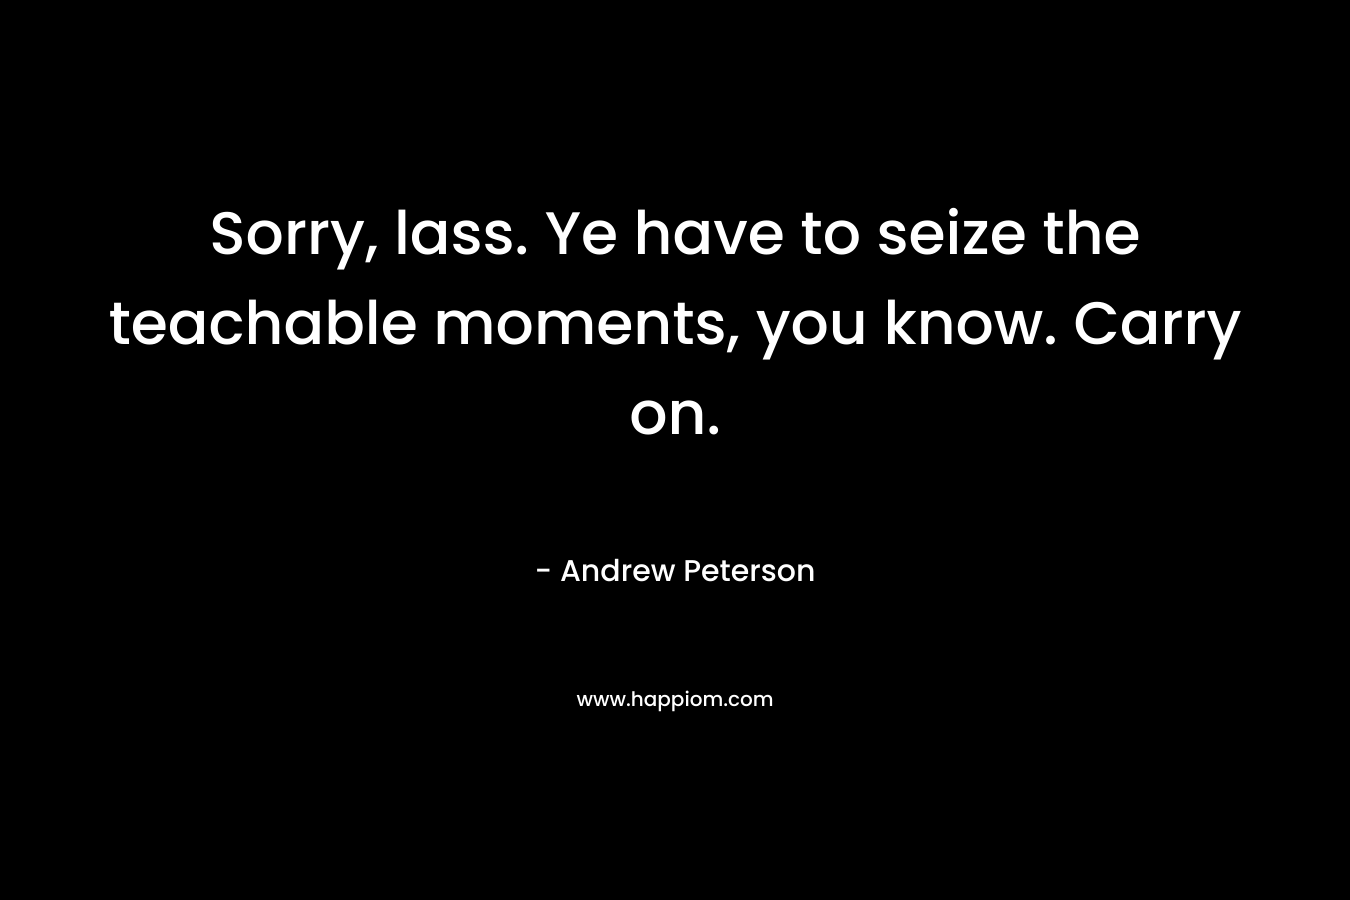 Sorry, lass. Ye have to seize the teachable moments, you know. Carry on. – Andrew Peterson